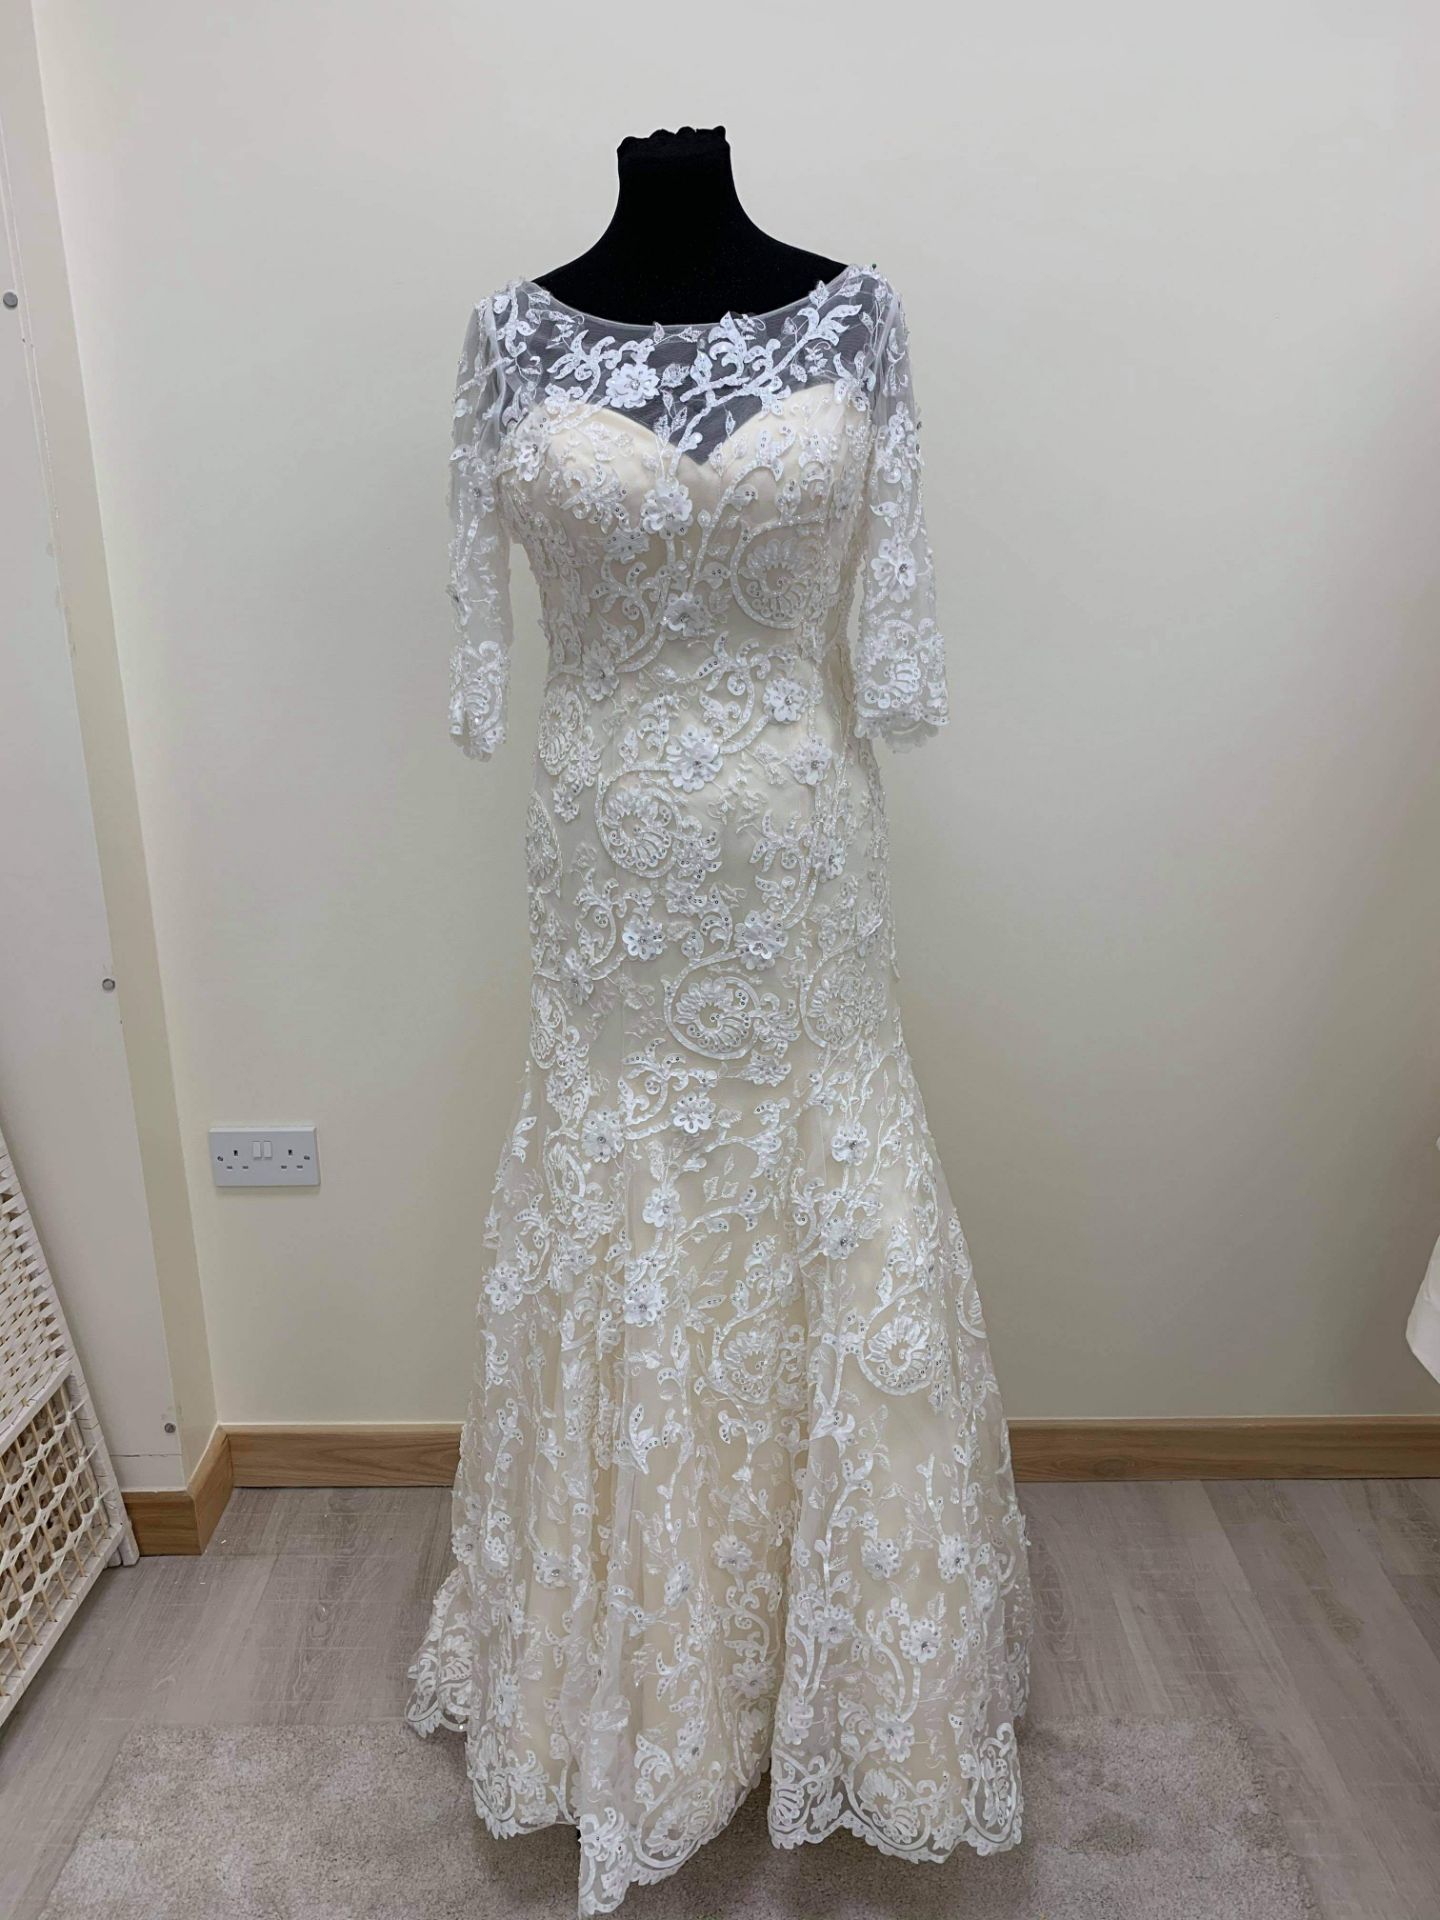 Bulk Lot of 25 Wedding Gowns/Bodices/Skirts All Mixed Sizes and Designs. RRP £25K Etx. Mainly Iv... - Bild 2 aus 2